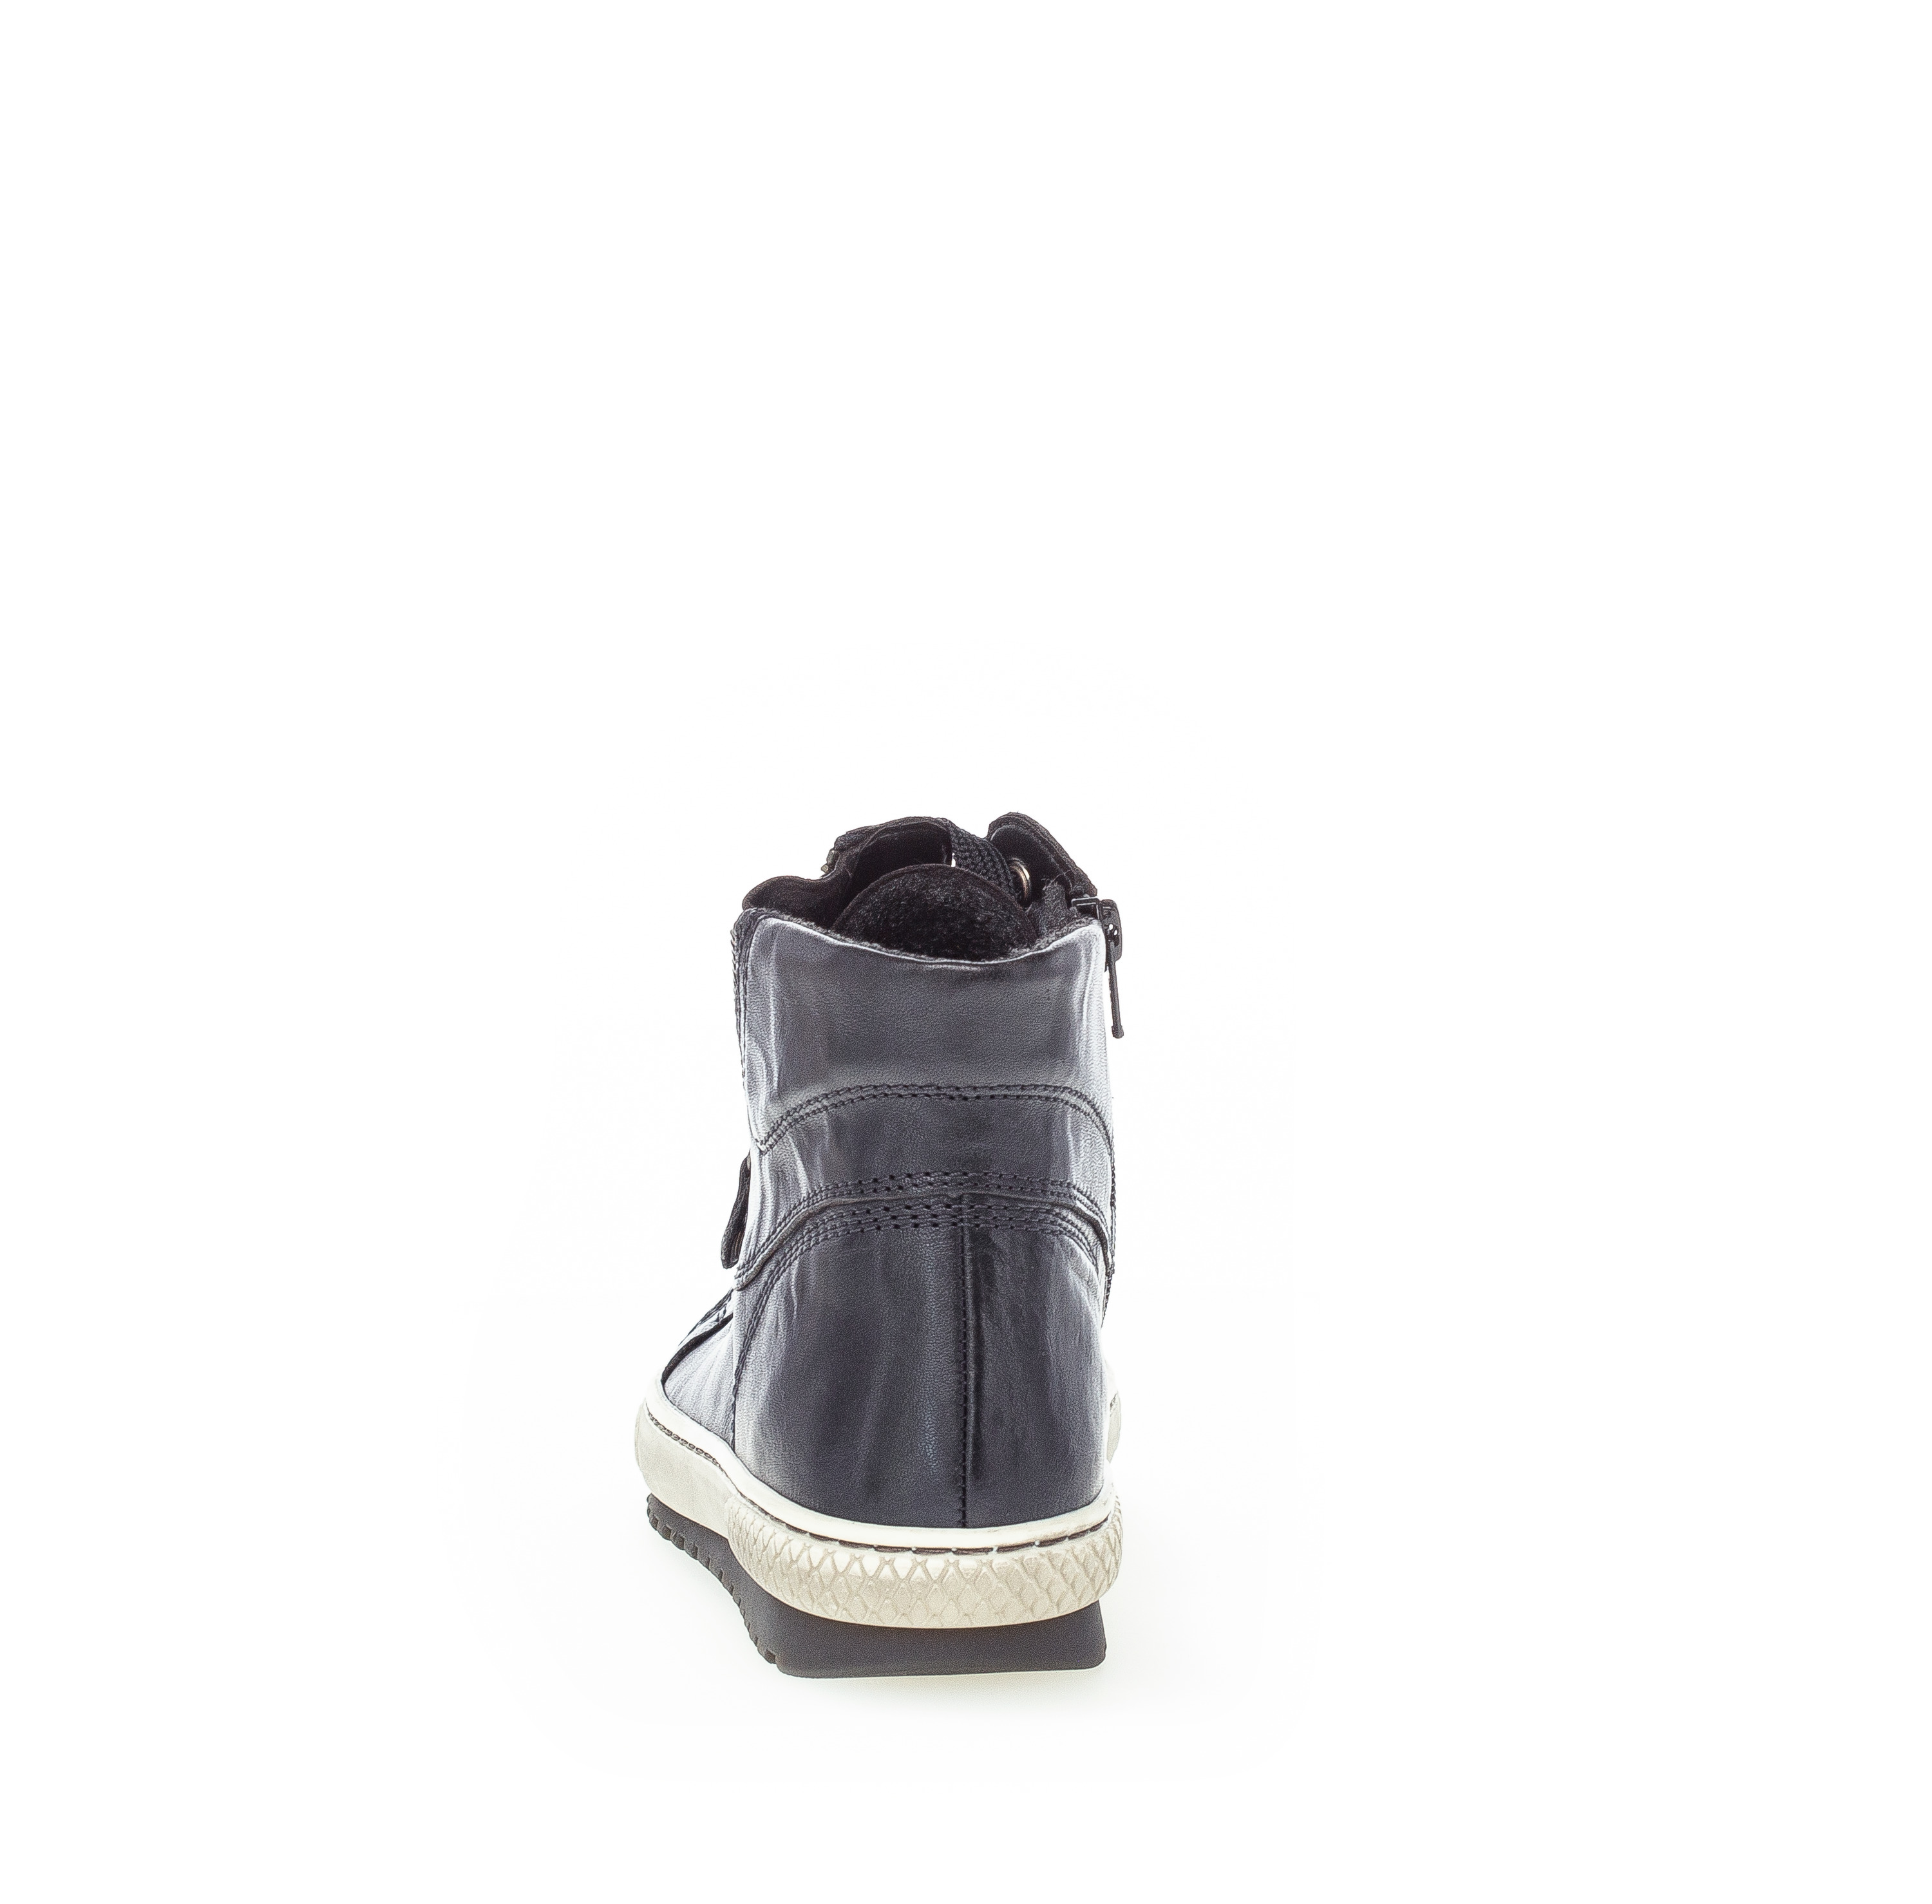 Gabor Shoes Boot - Dark blue smooth leather